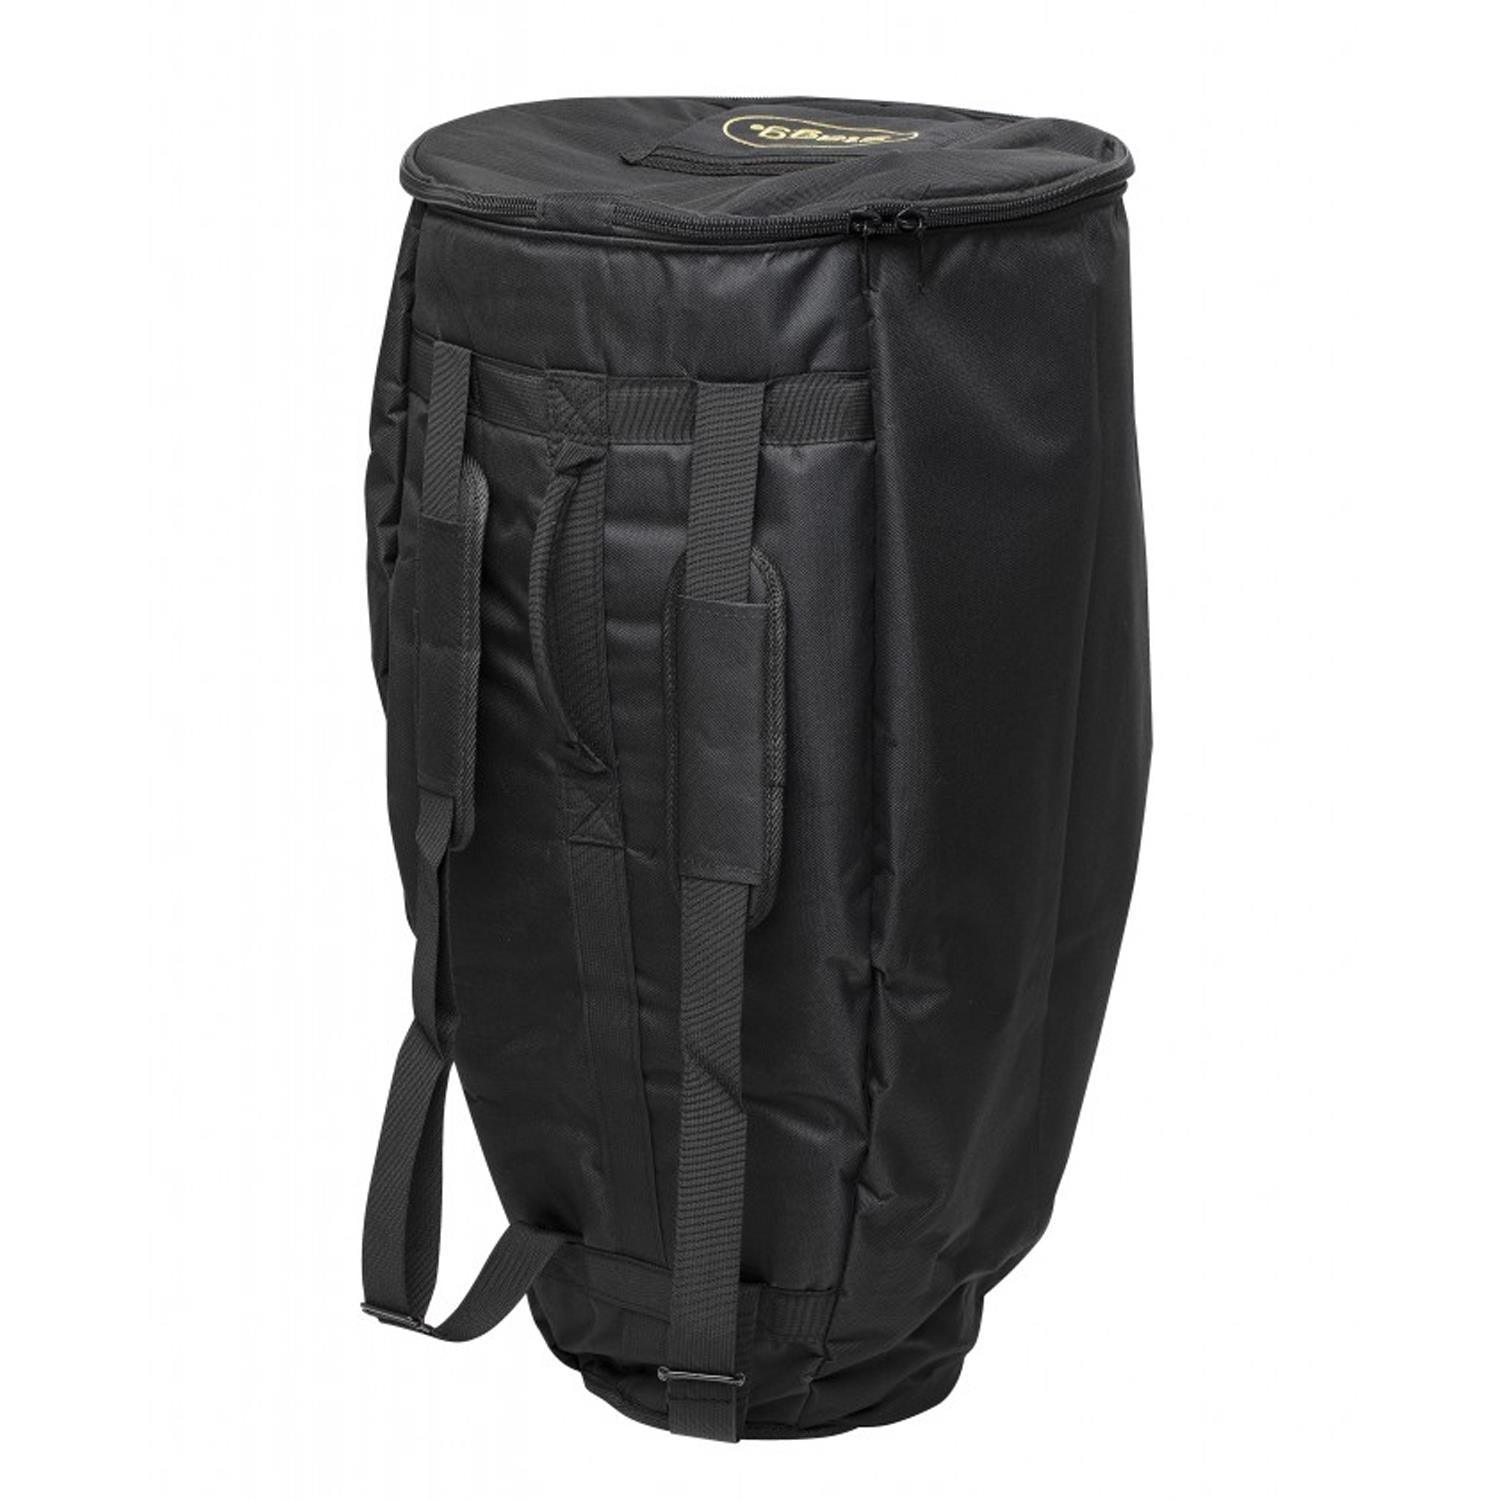 Stagg CGB-10 BK 10" Conga Carry Bag - DY Pro Audio